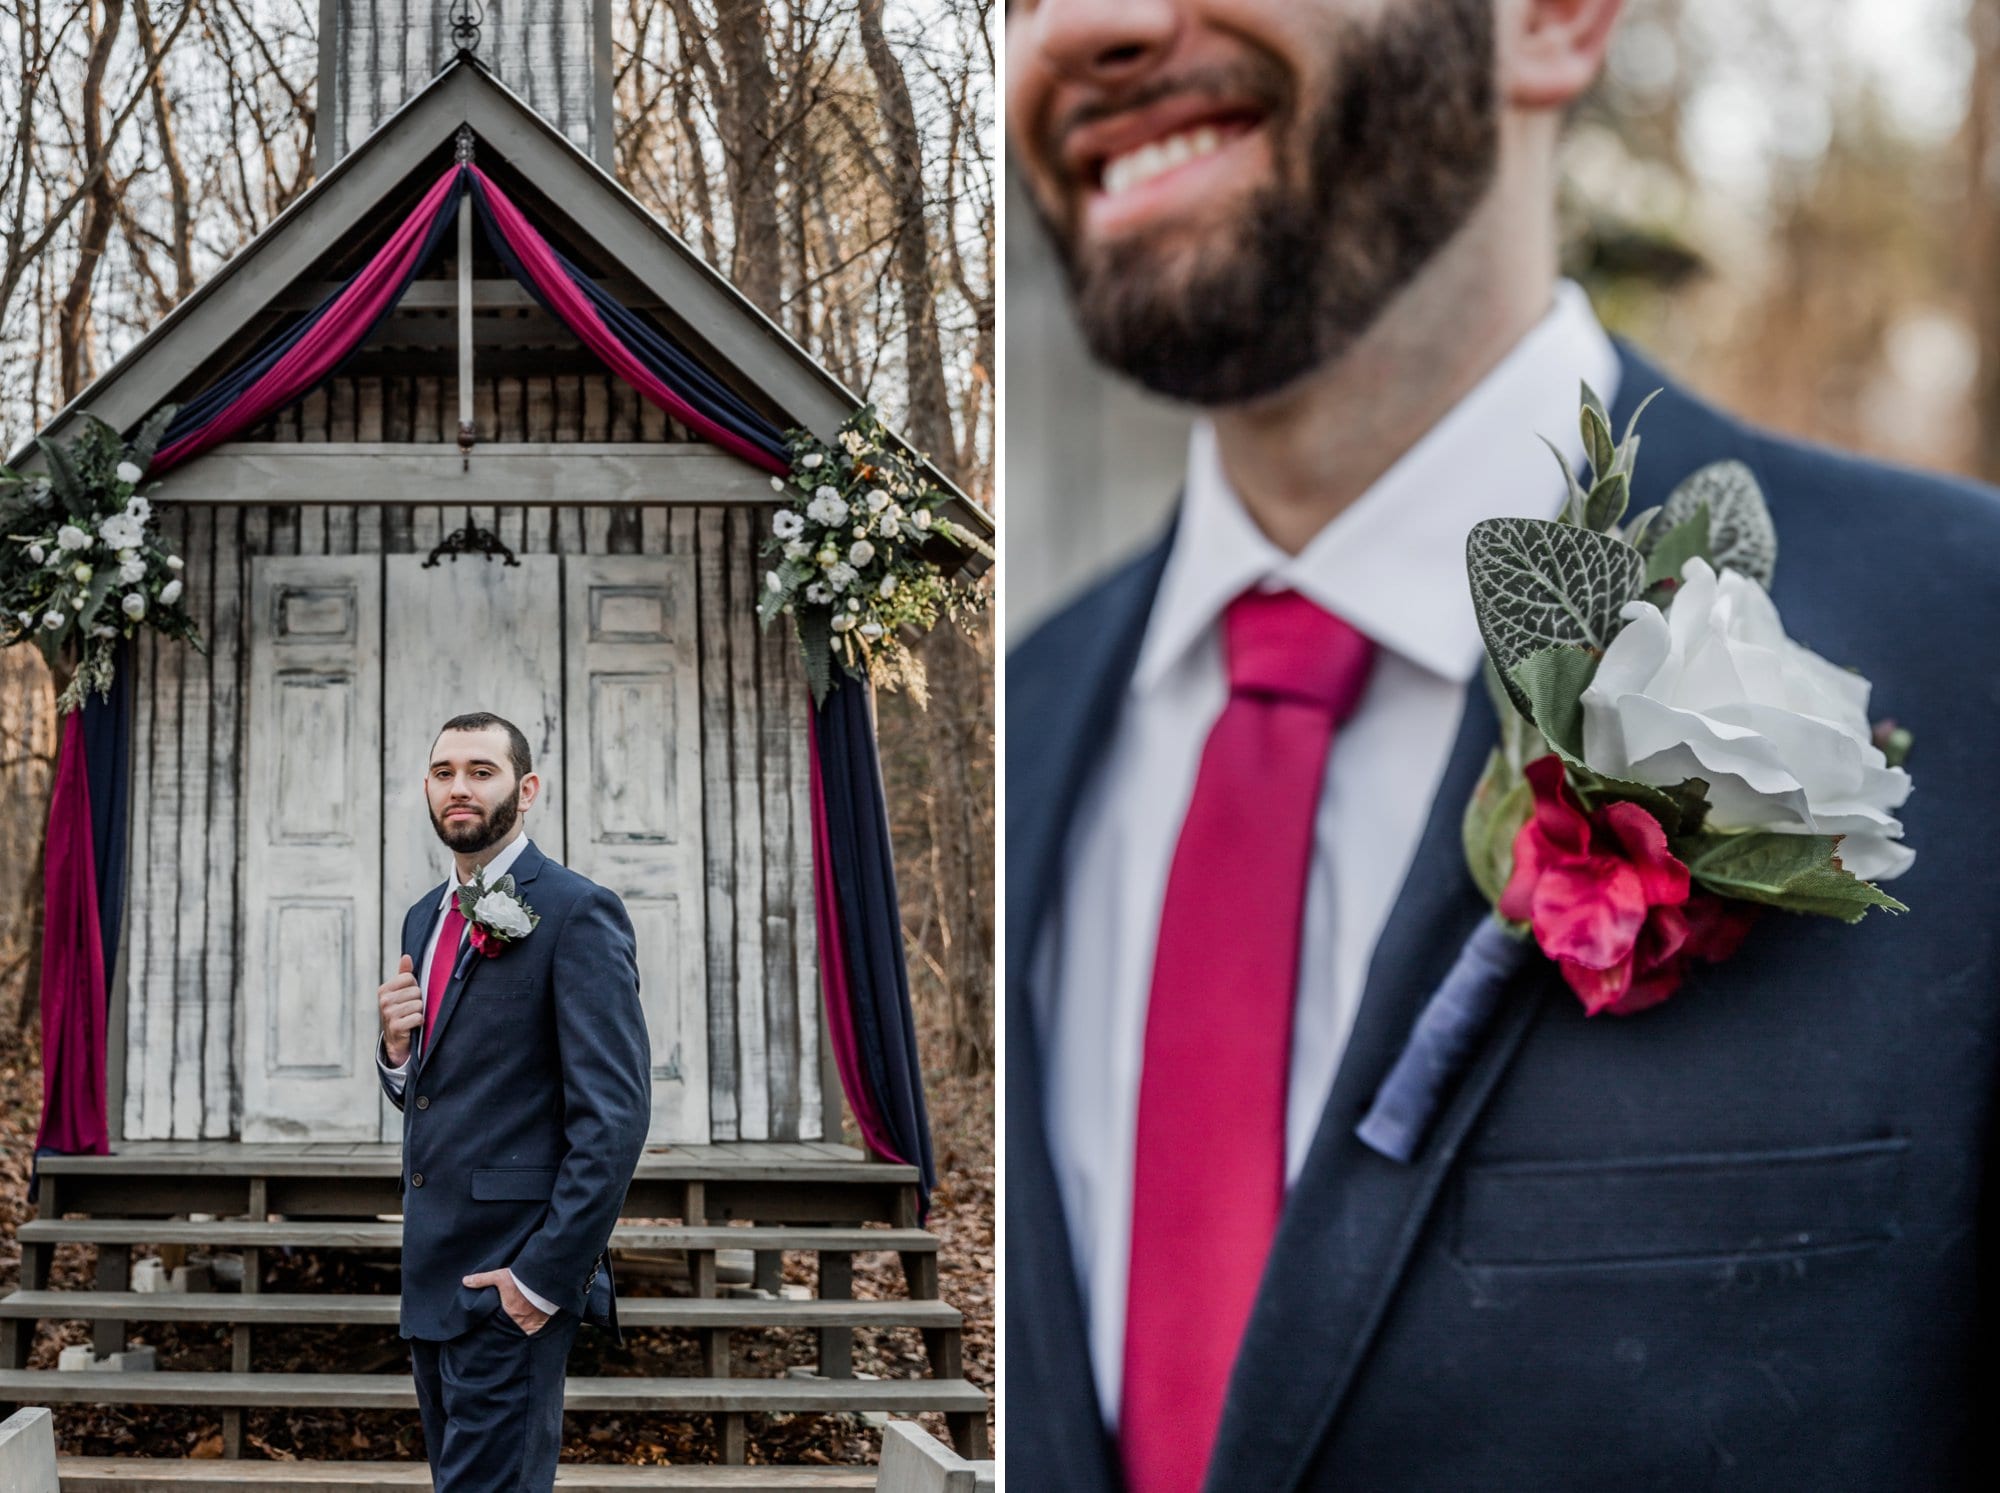 Groom in front of outdoor chapel getting married in the Smoky Mountains.